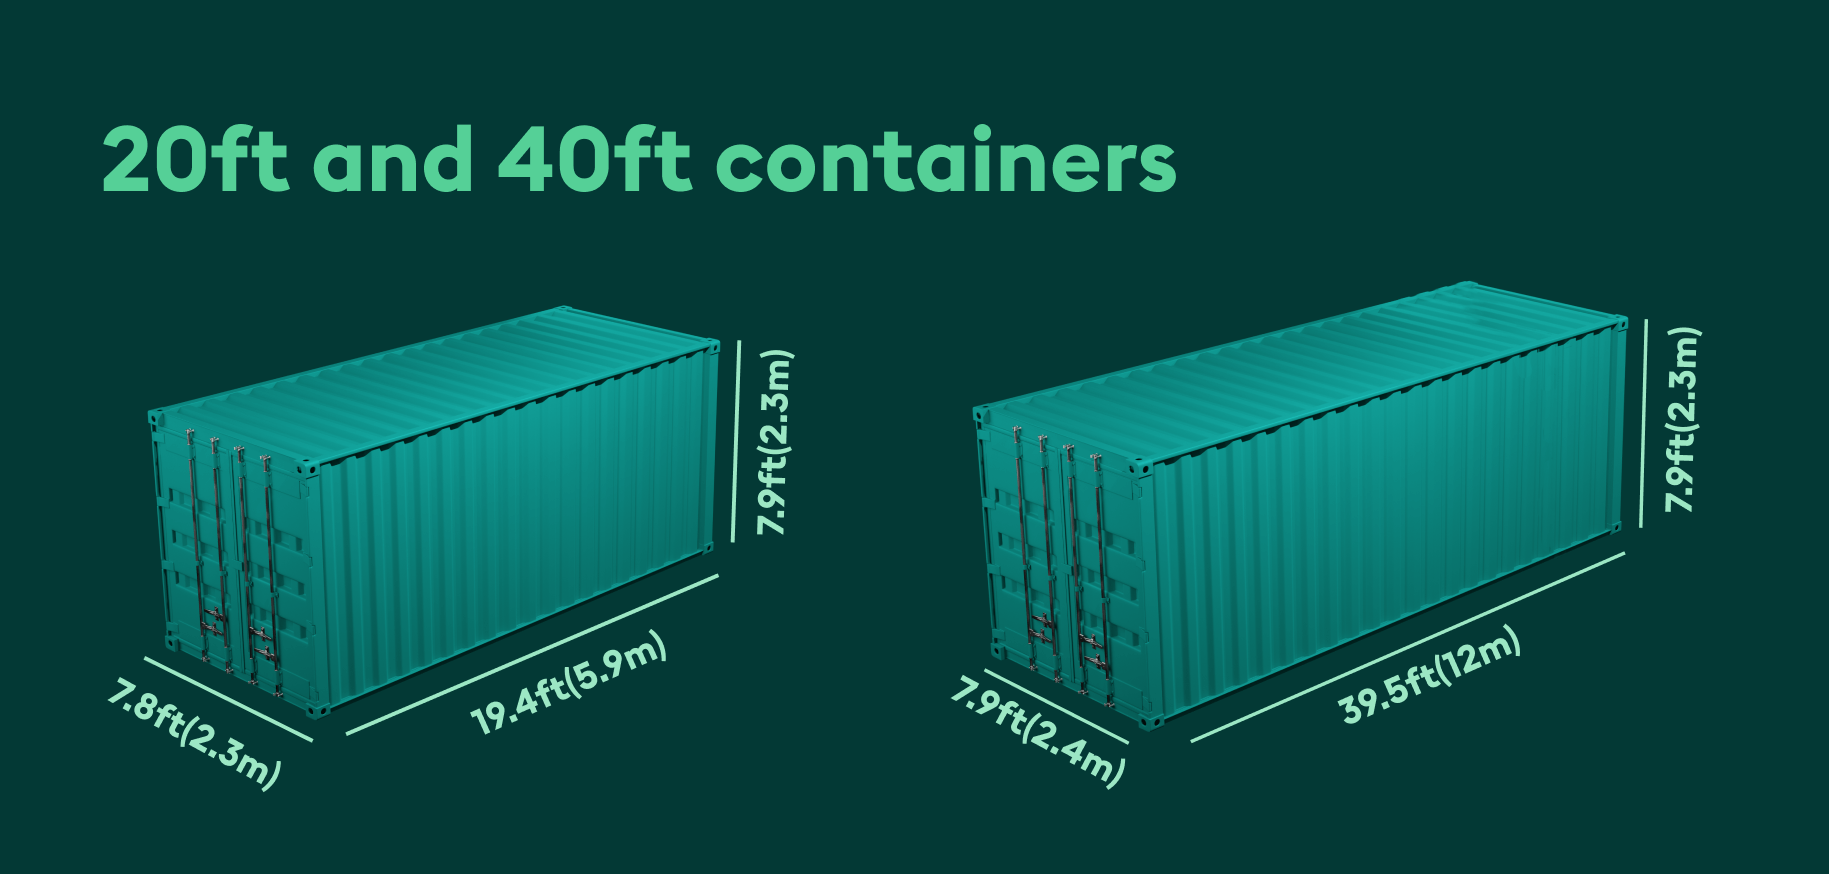 20ft and 40ft container dimensions